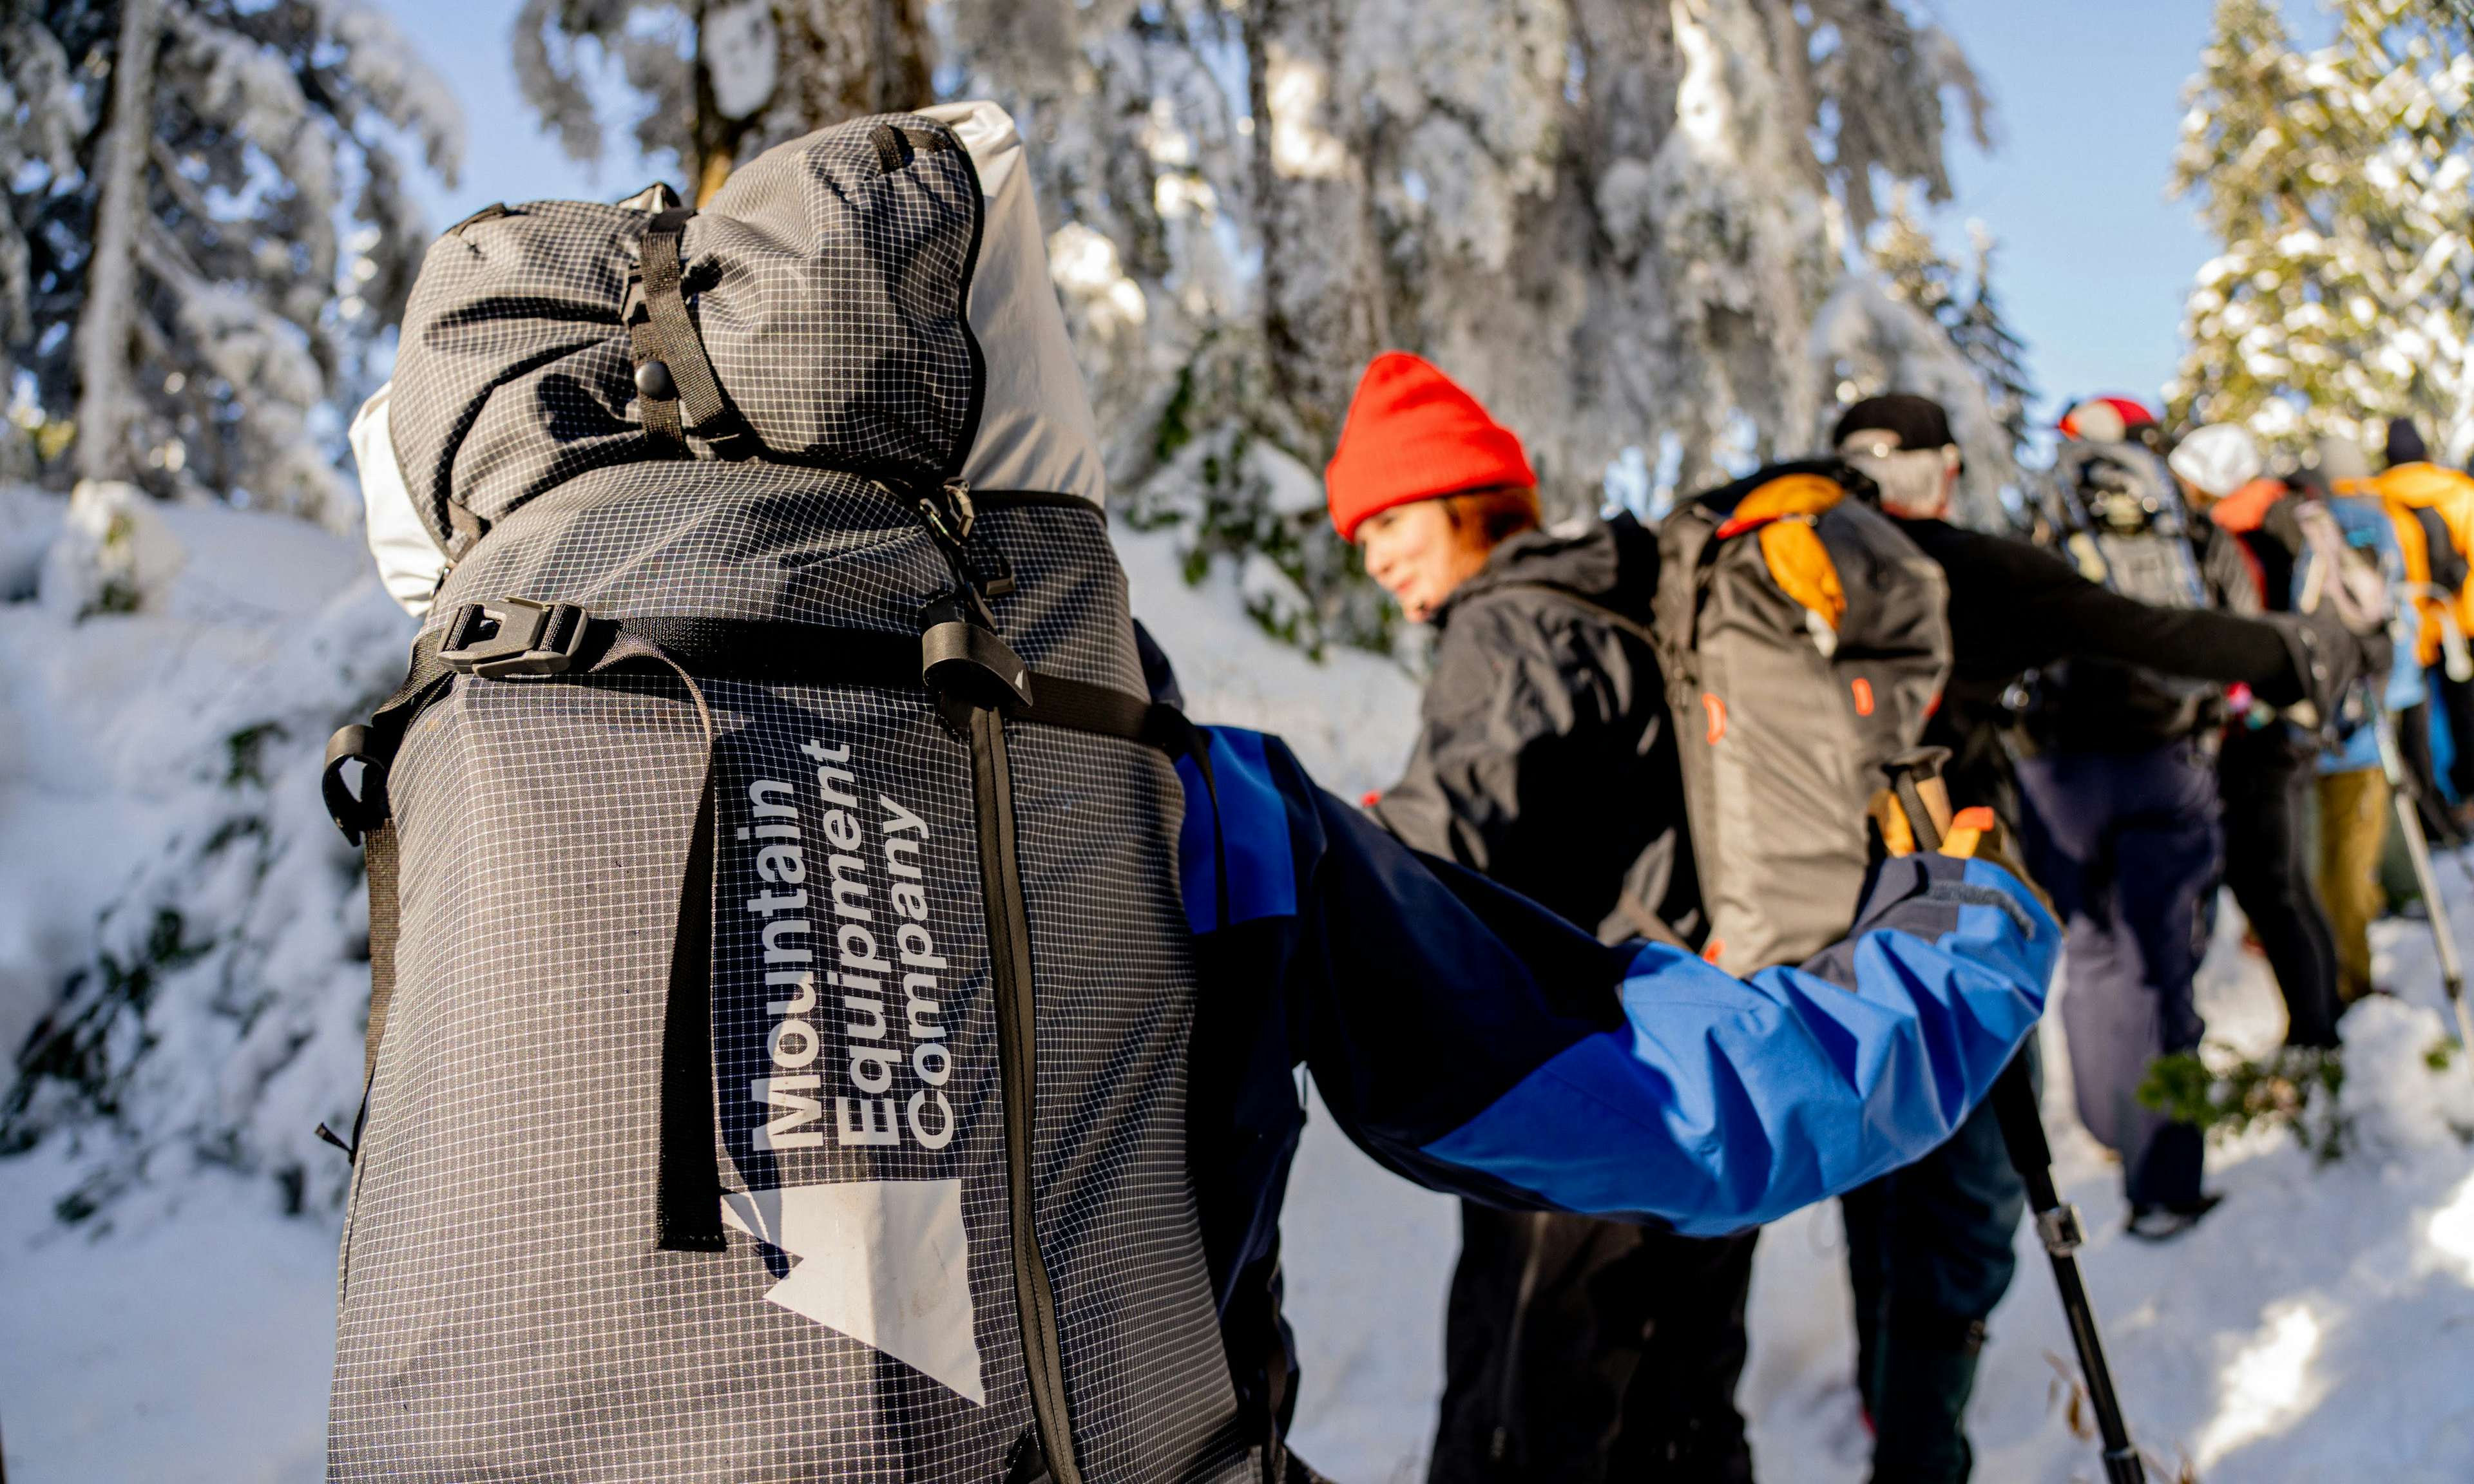 Six people with camping backpacks snowshoeing in the forest